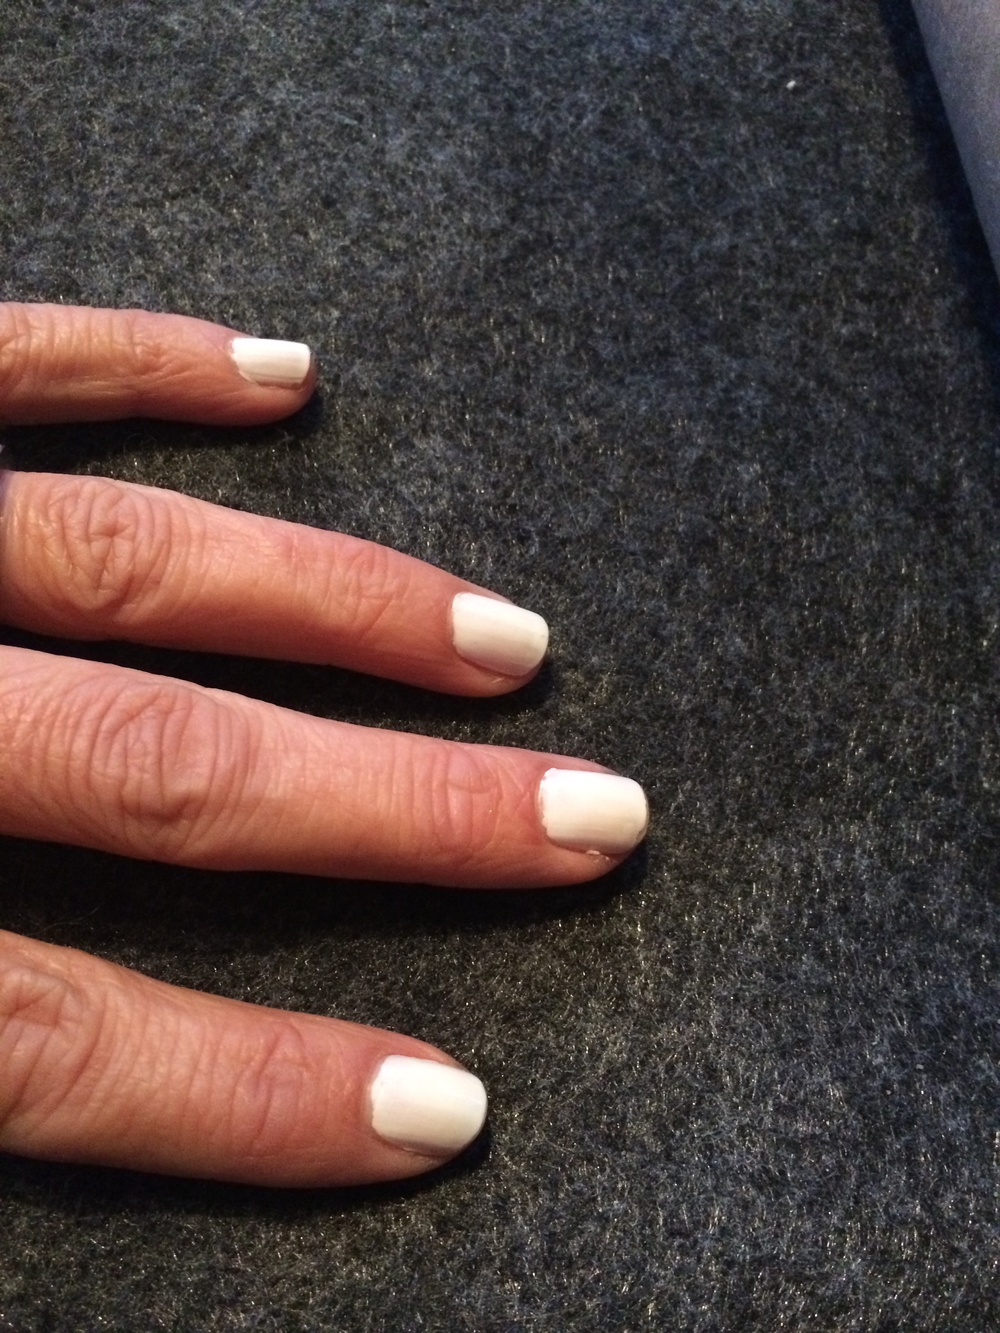  My white nails 1 week after my manicure using Covergirl Snow Storm & Deborah Lippman as a base and top coat. 